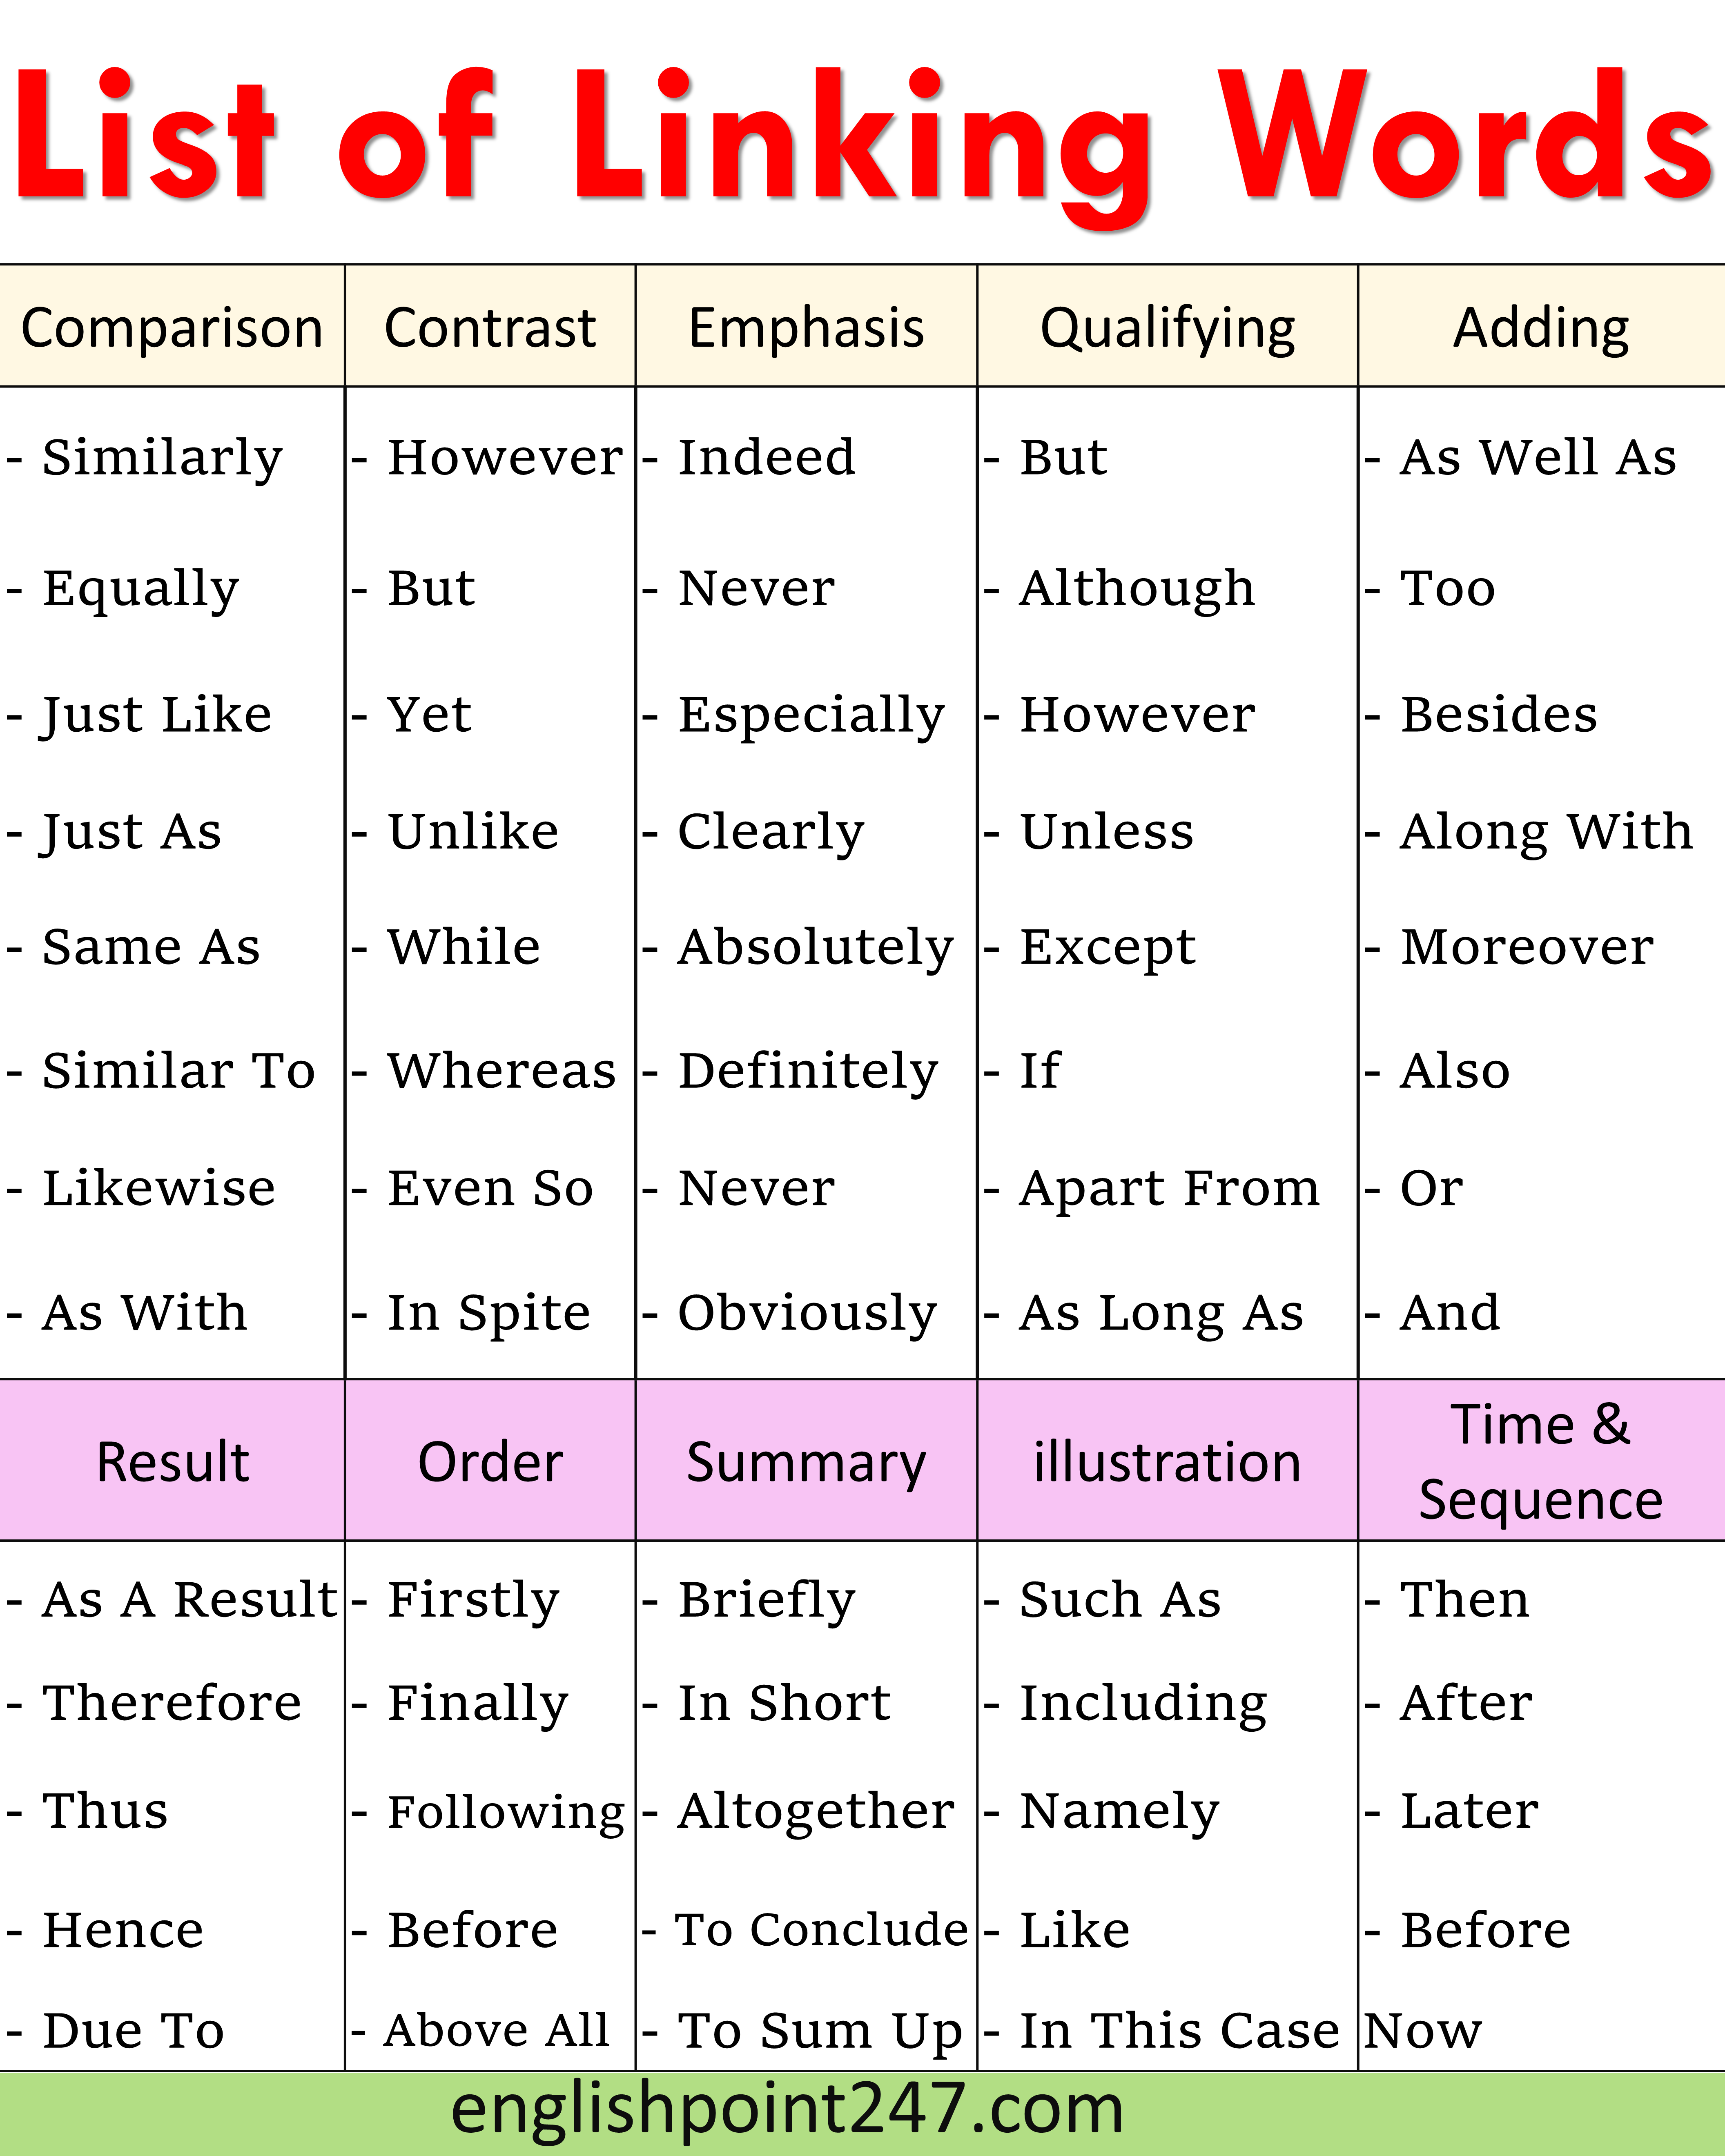 List of Linking Words in English with Examples - EnglishPoint247